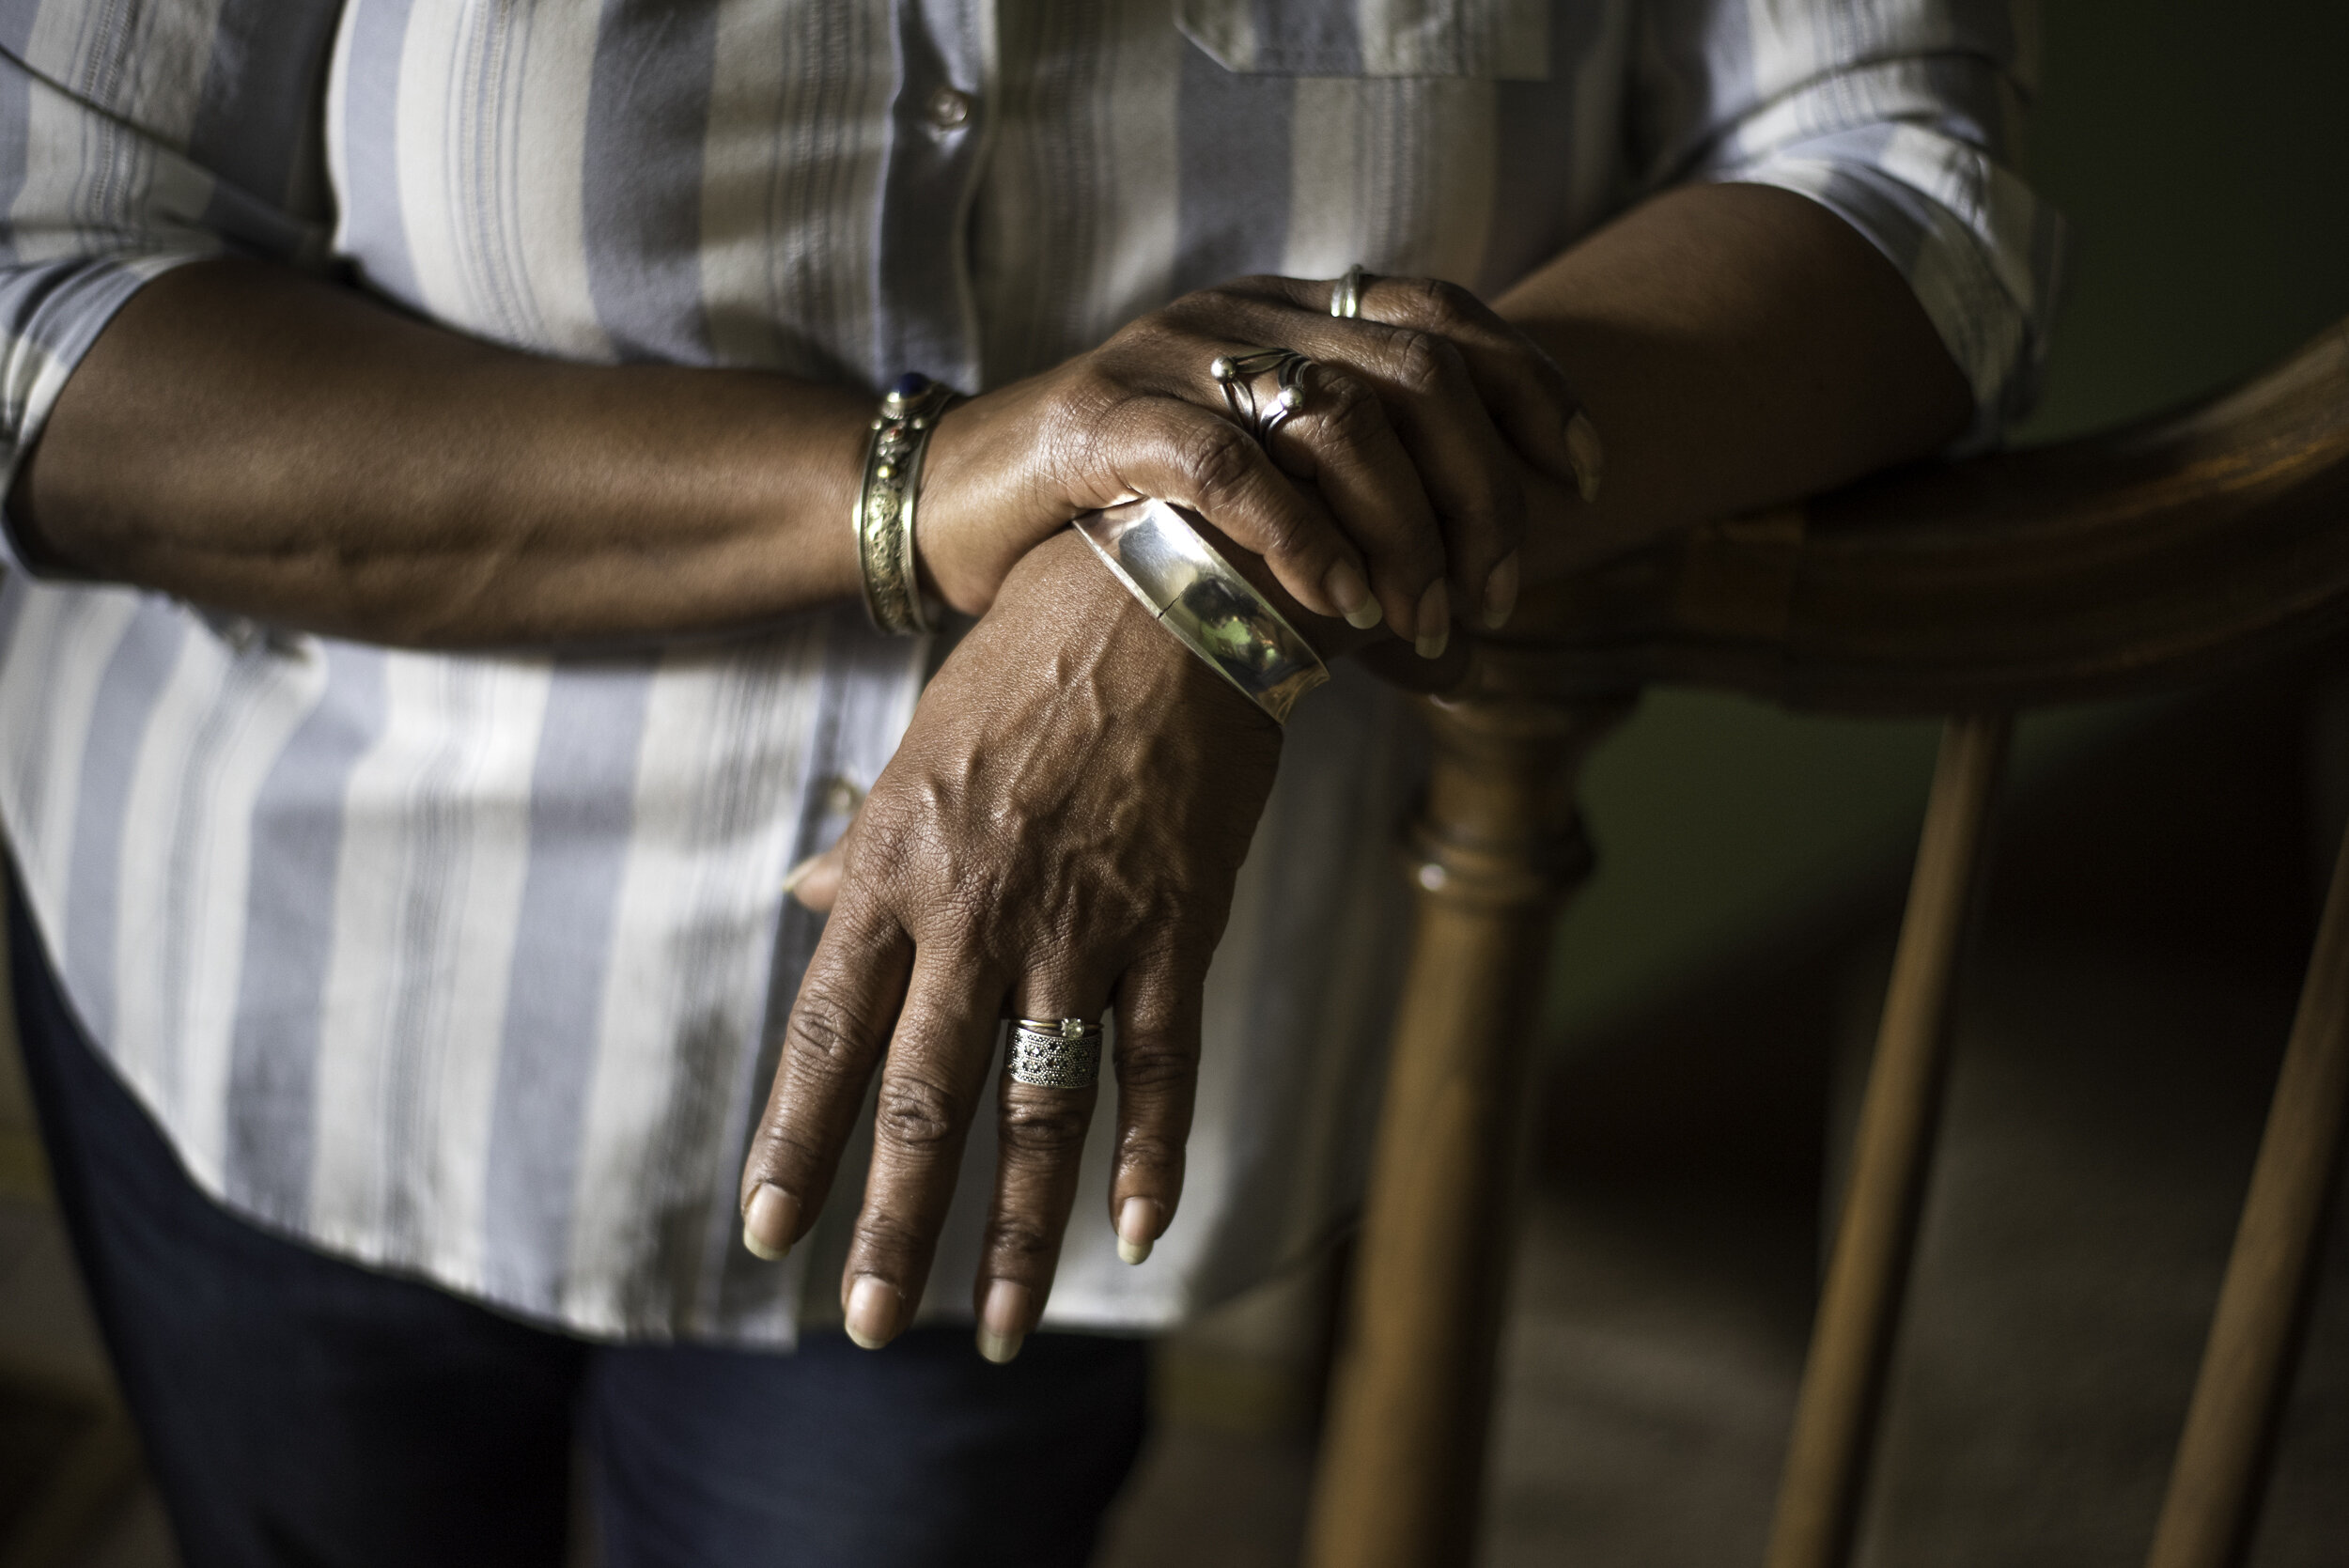   Hands tell a story. Here, it’s a hallmark of my mother’s wisdom. Her sterling silver jewelry is a signifier of her personal style and self-expression. (Southfield, MI on Saturday, May 2, 2020)  